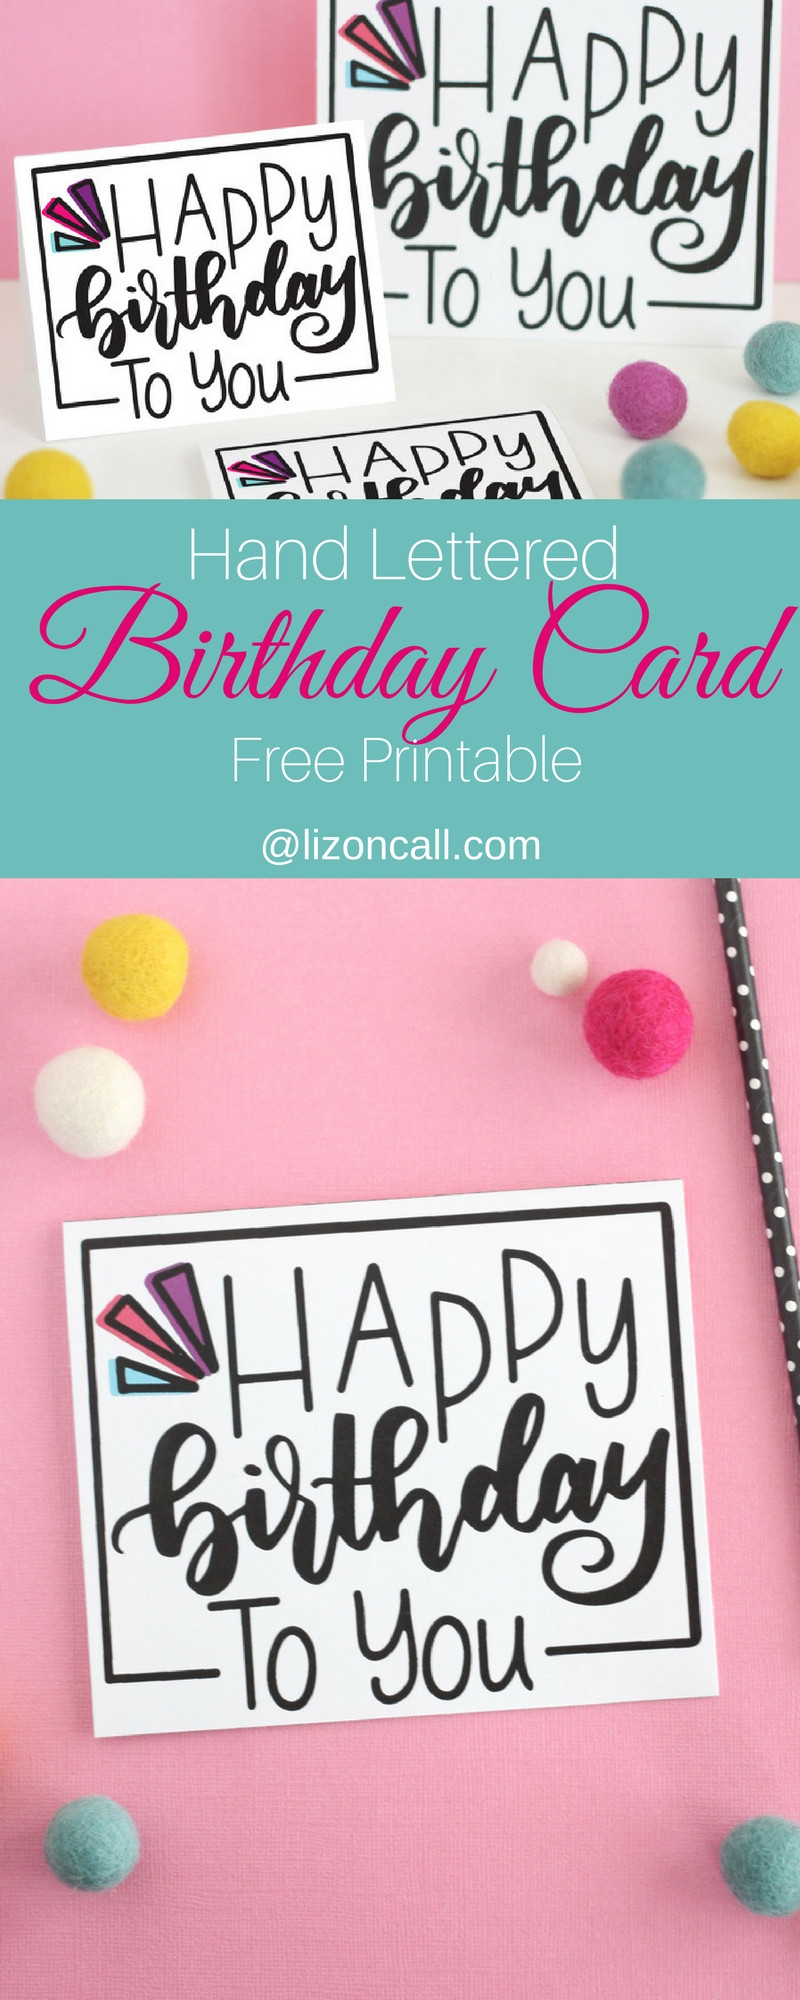 Birthday Cards To Print Out
 Hand Lettered Free Printable Birthday Card Liz on Call